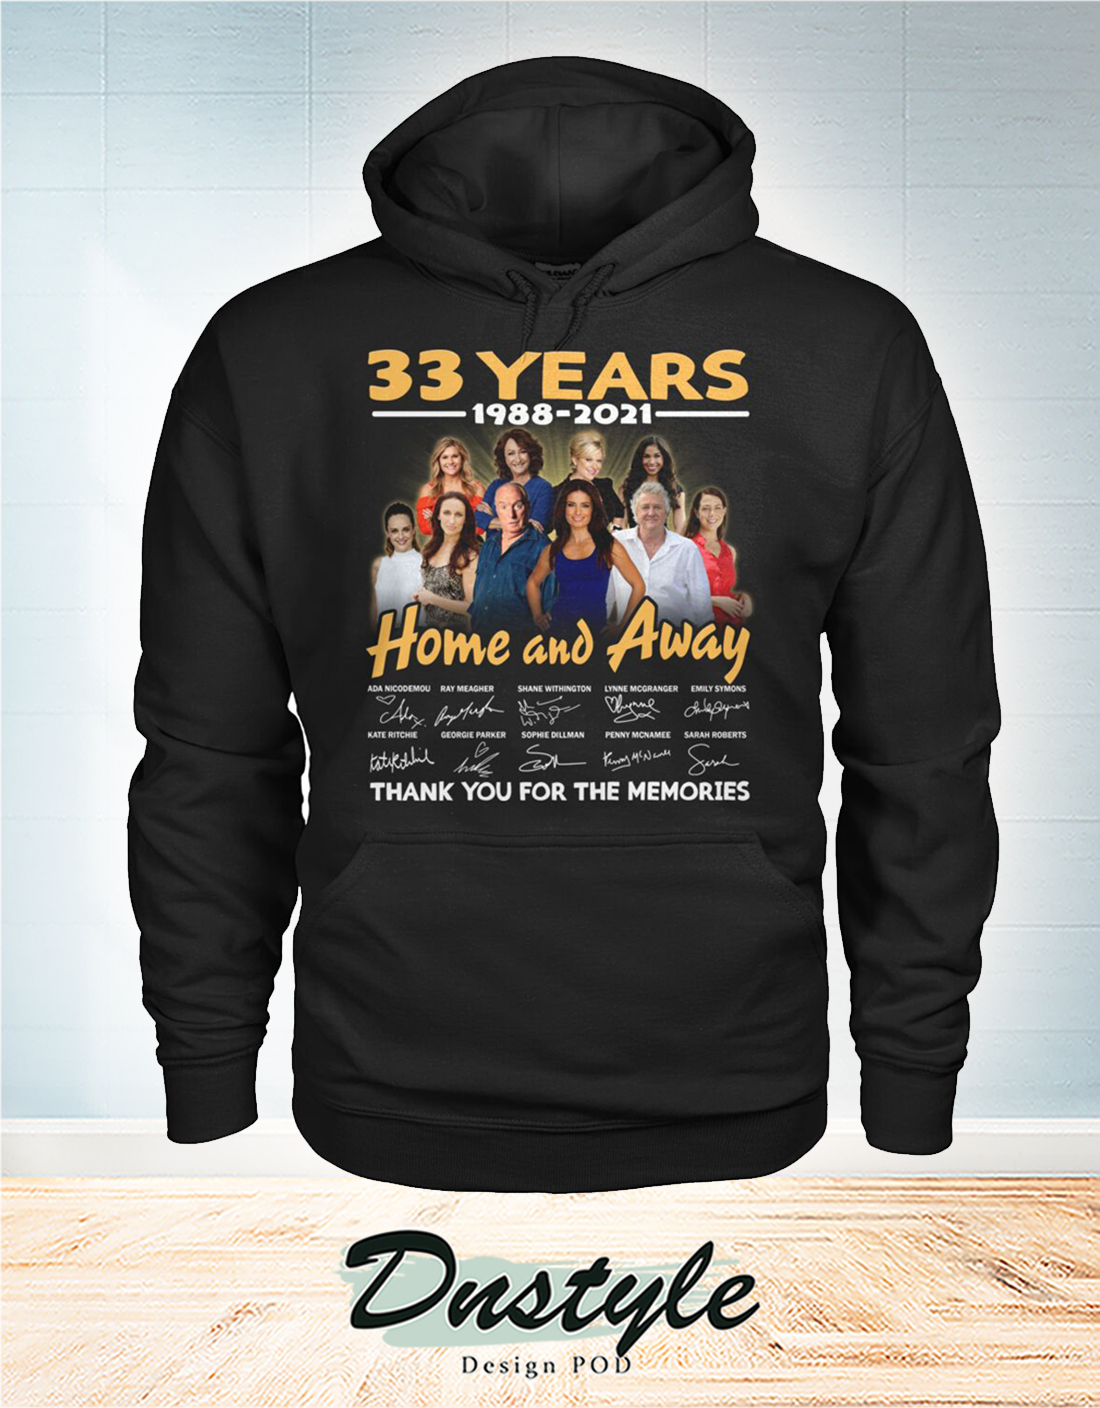 Home and away 33 years thank you for the memories hoodie